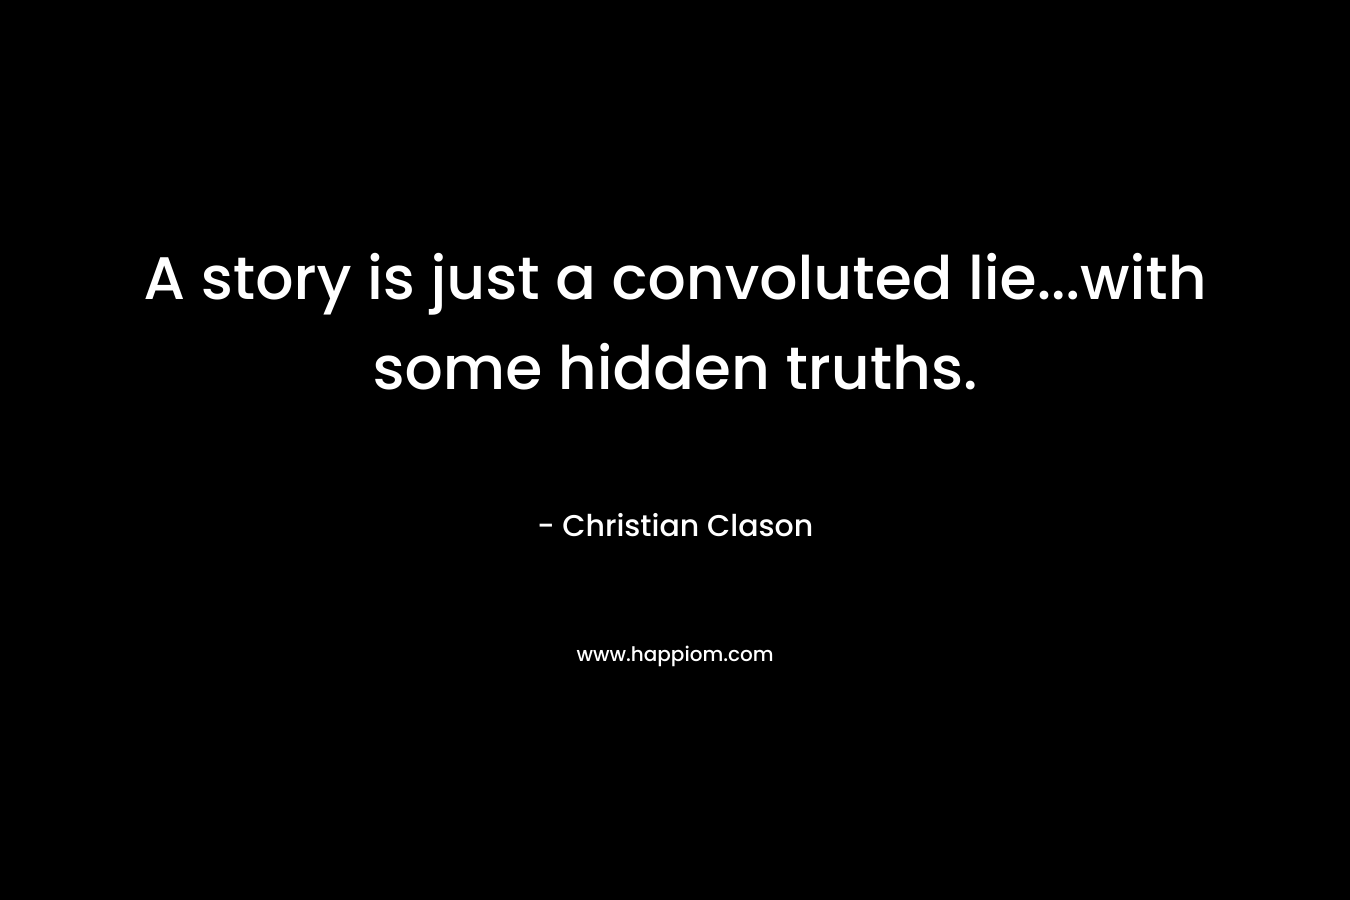 A story is just a convoluted lie…with some hidden truths. – Christian Clason